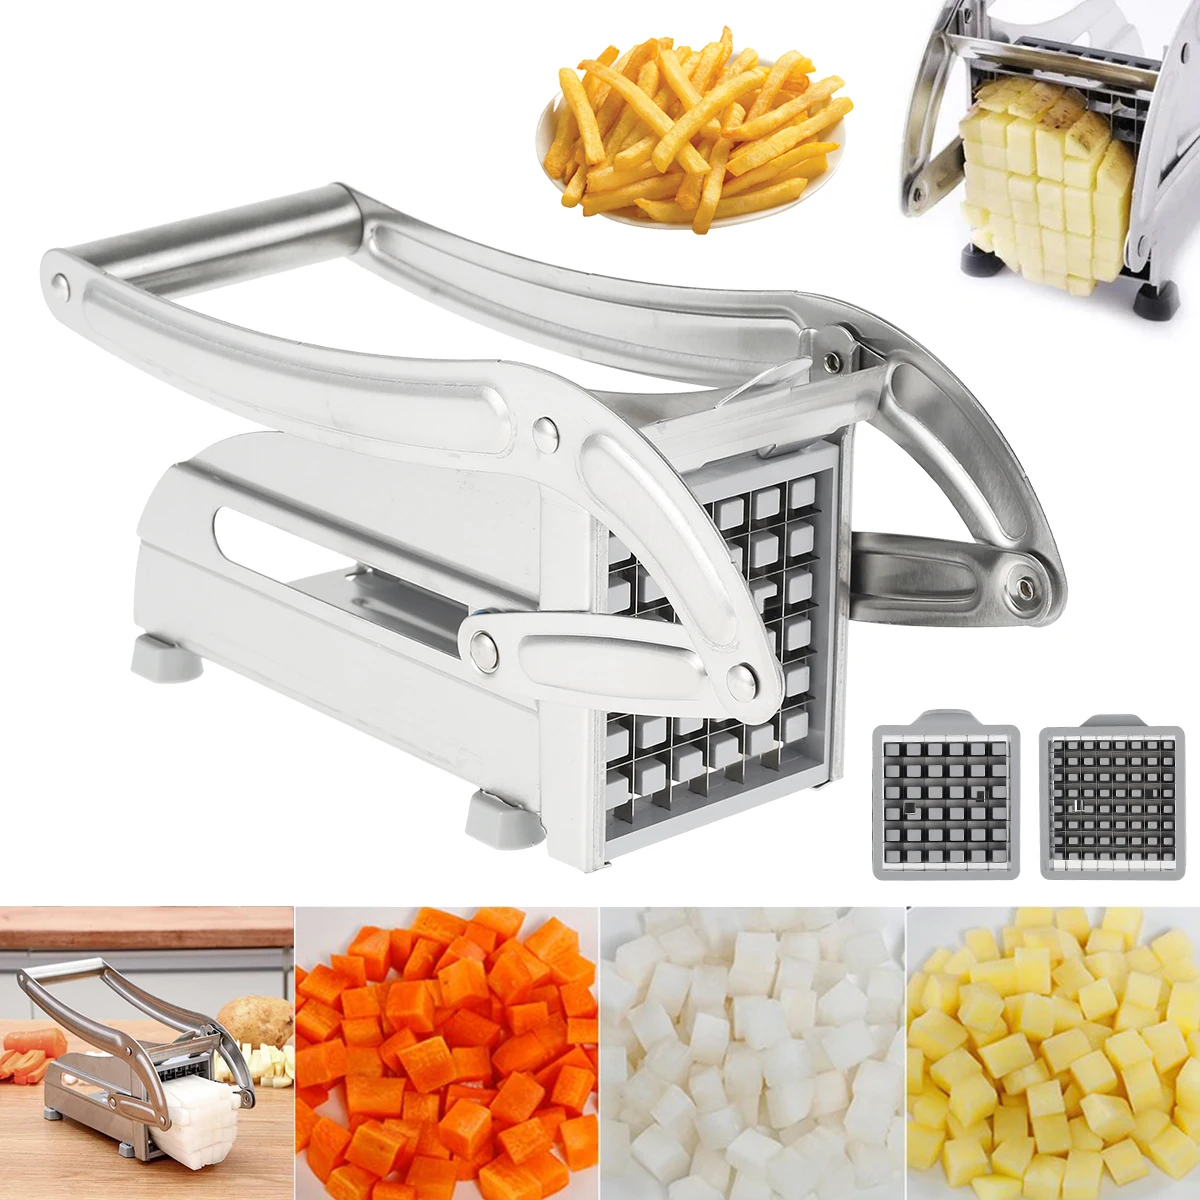 Potato Slicer Multifunction Vegetable Fruit Chopper with 2 Stainless Steel  Blades for Tomato Potato Cooking Slicer Gadget